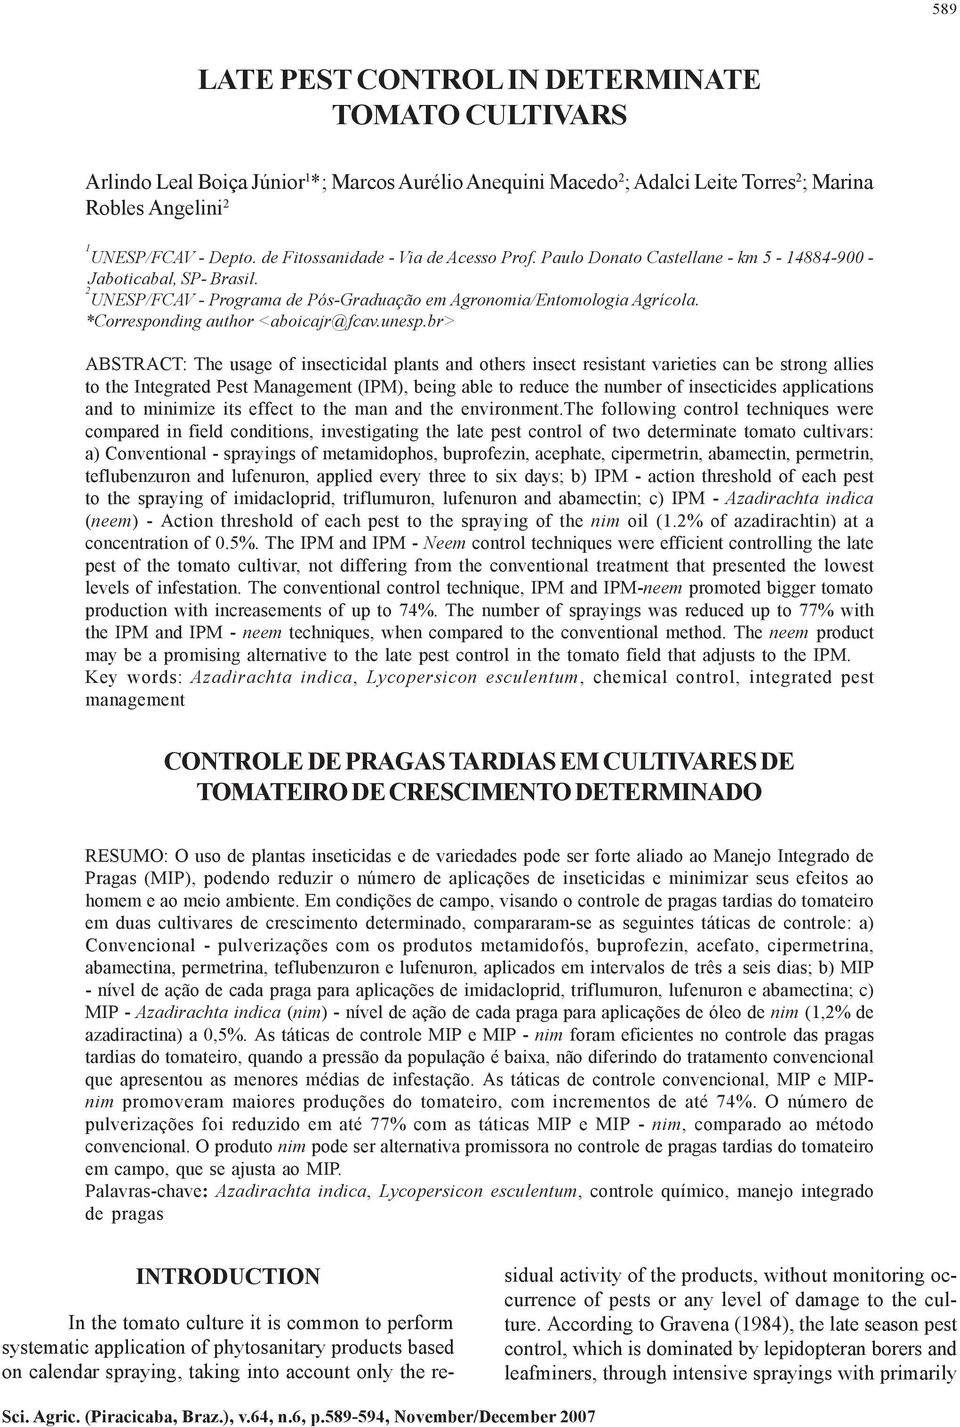 r> ABSTRACT: The usge of iecticidl plnts nd others iect resistnt vrieties cn e strong llies to the Integrted Pest Mngement (IPM), eing le to reduce the numer of iecticides pplictio nd to minimize its